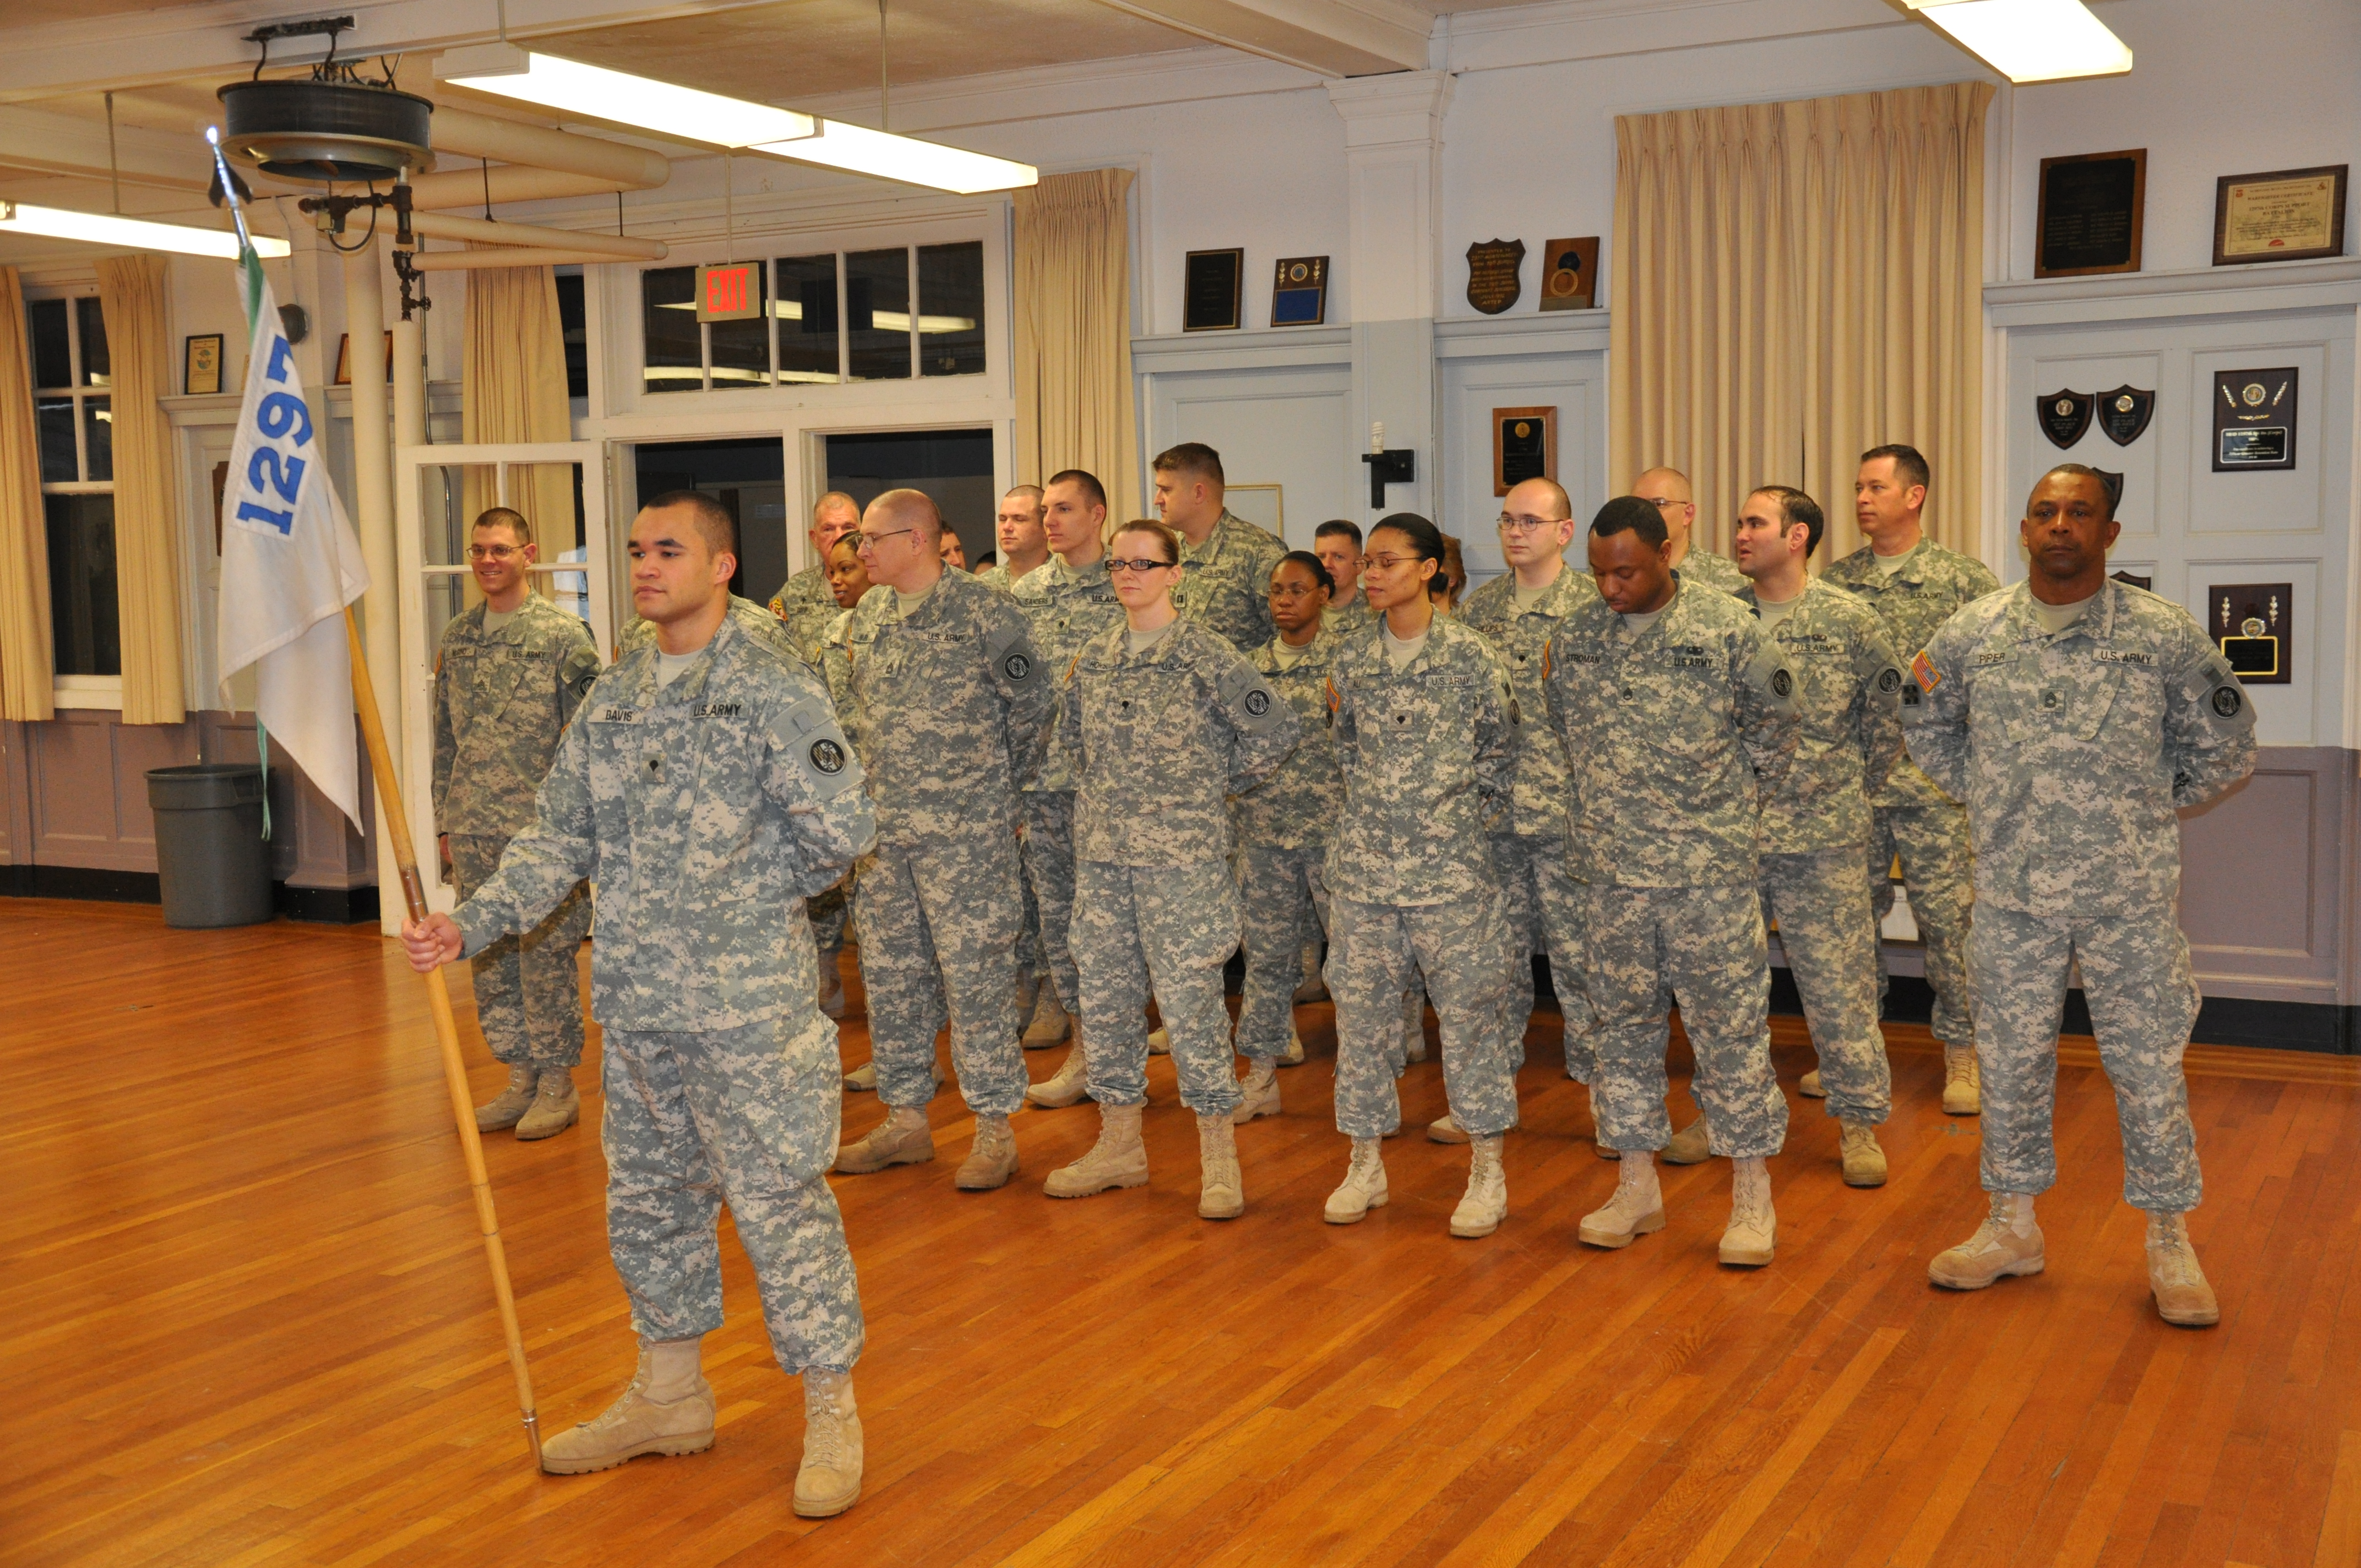 The 1297th CSSB Receives Outstanding Unit Award from MOAA